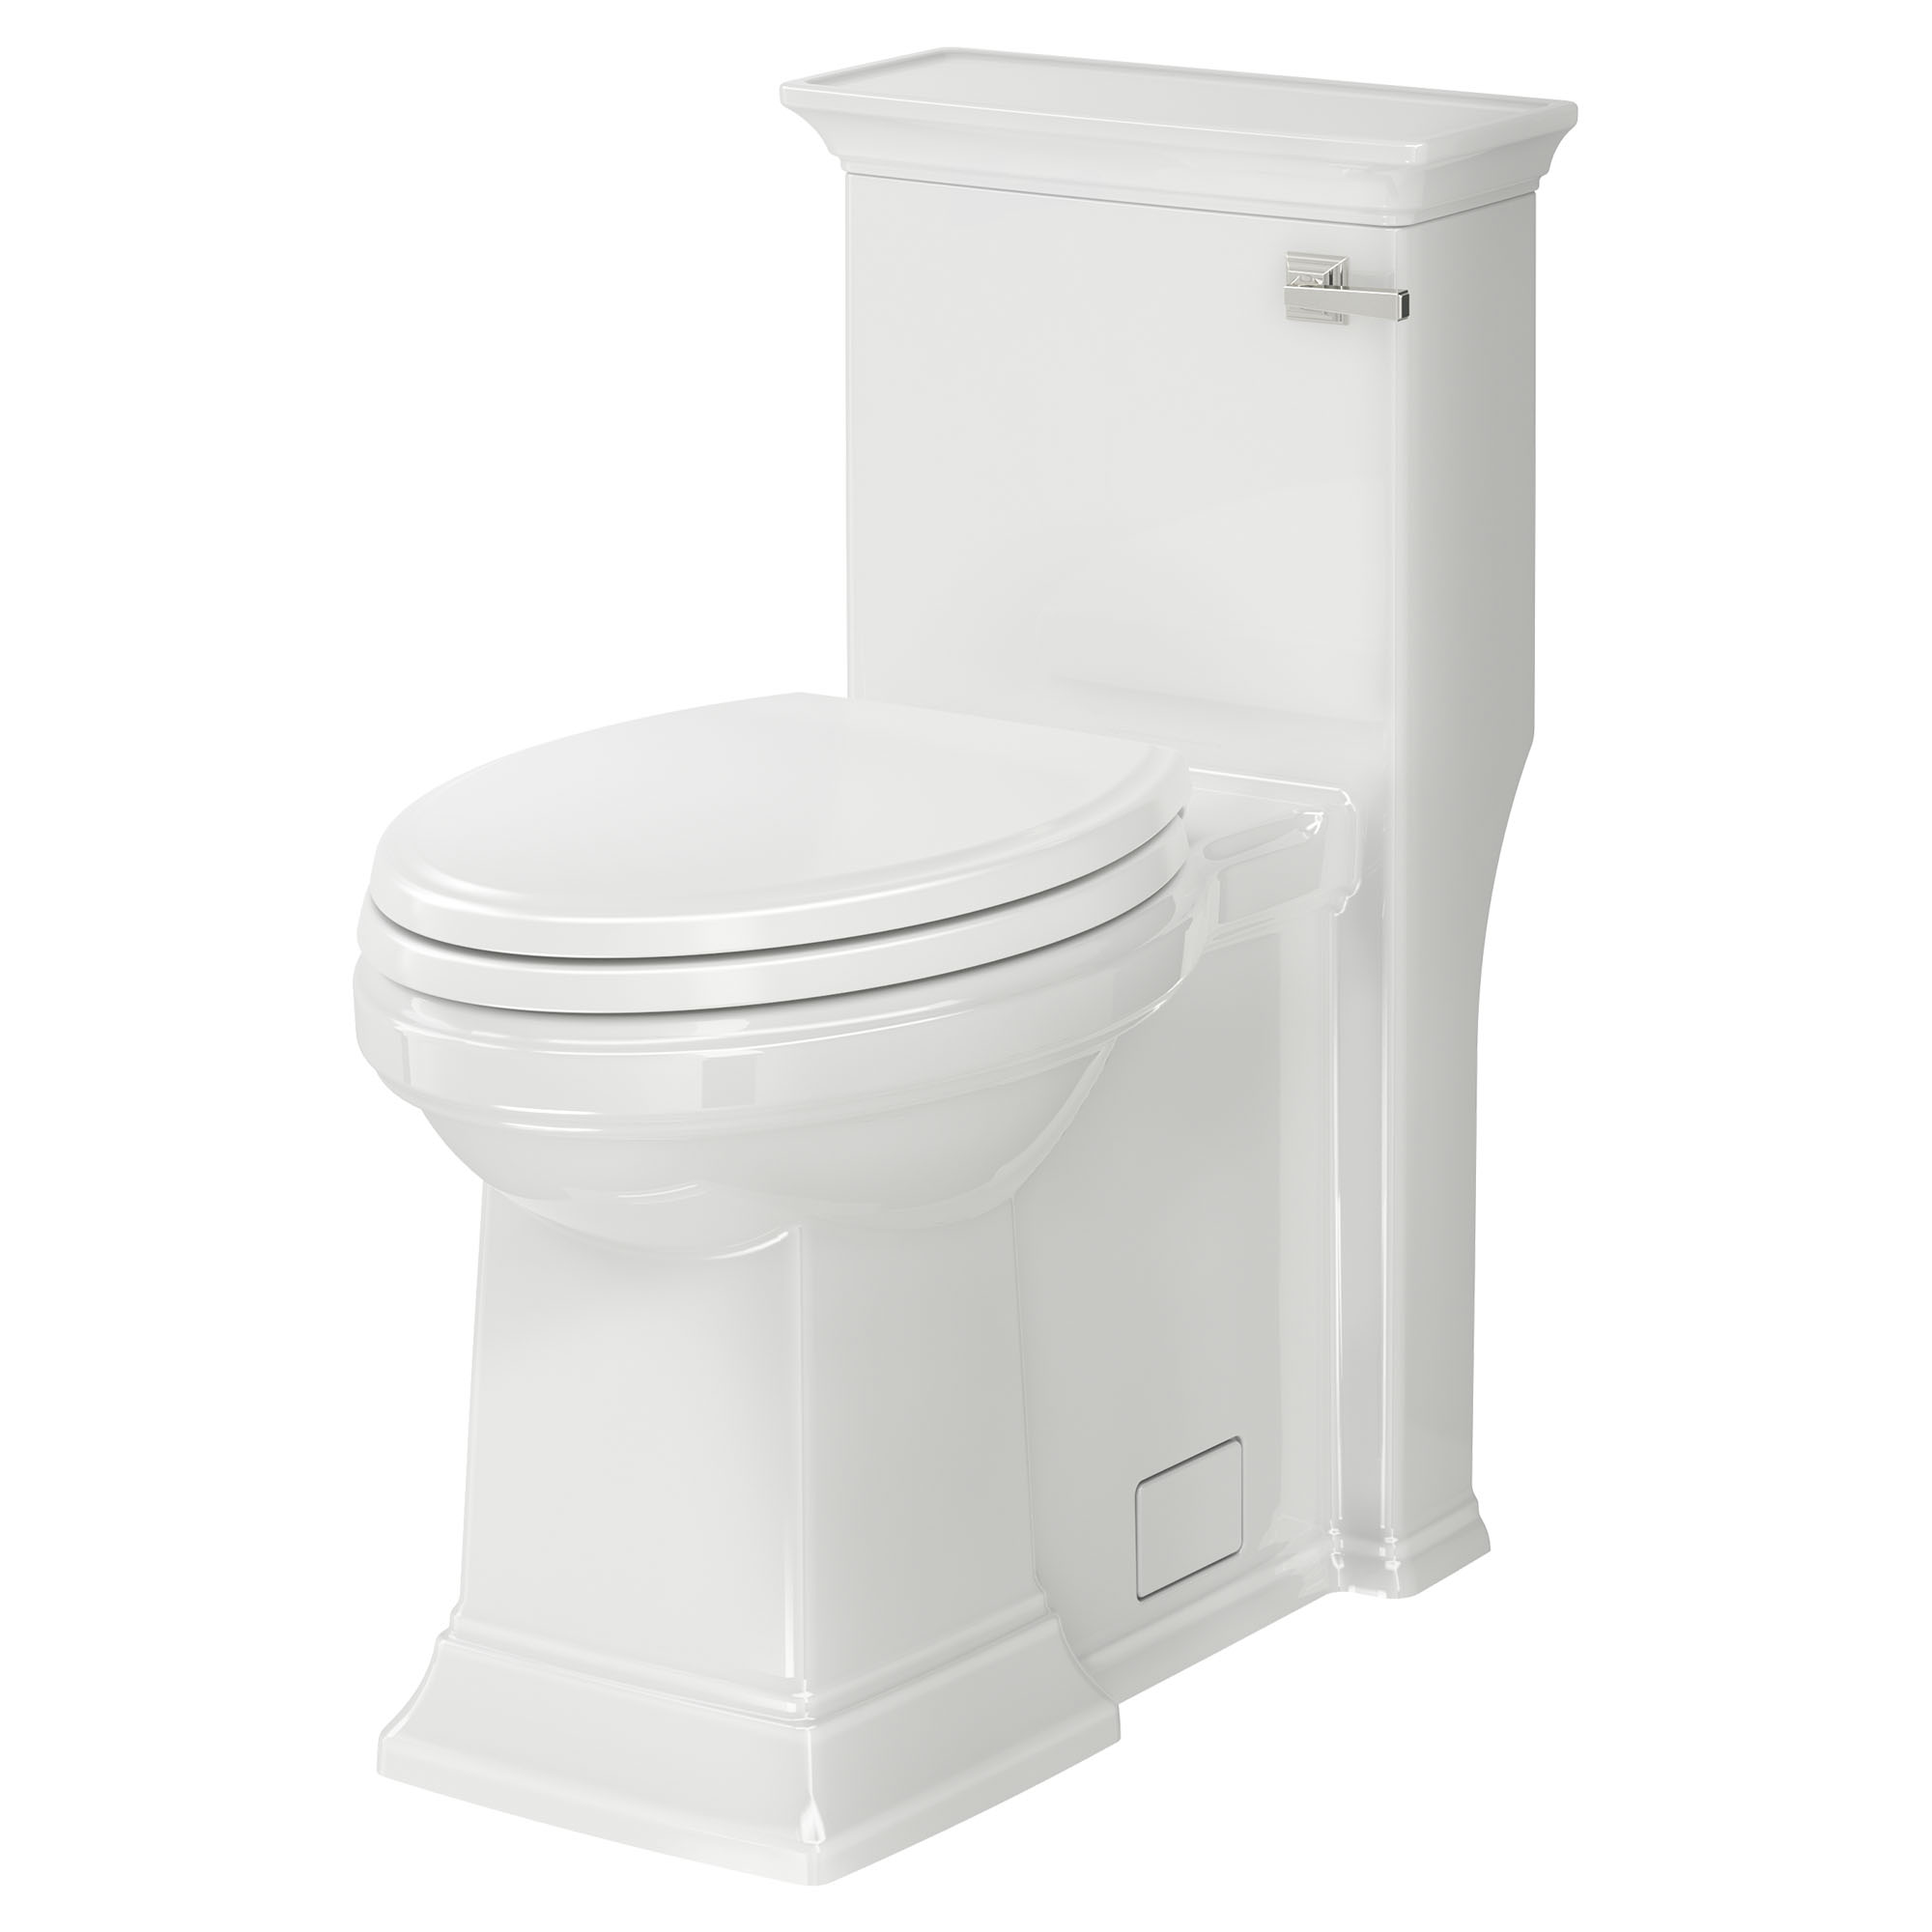 Town Square™ S One-Piece 1.28 gpf/4.8 Lpf Chair Height Right-Hand Trip Lever Elongated Toilet With Seat